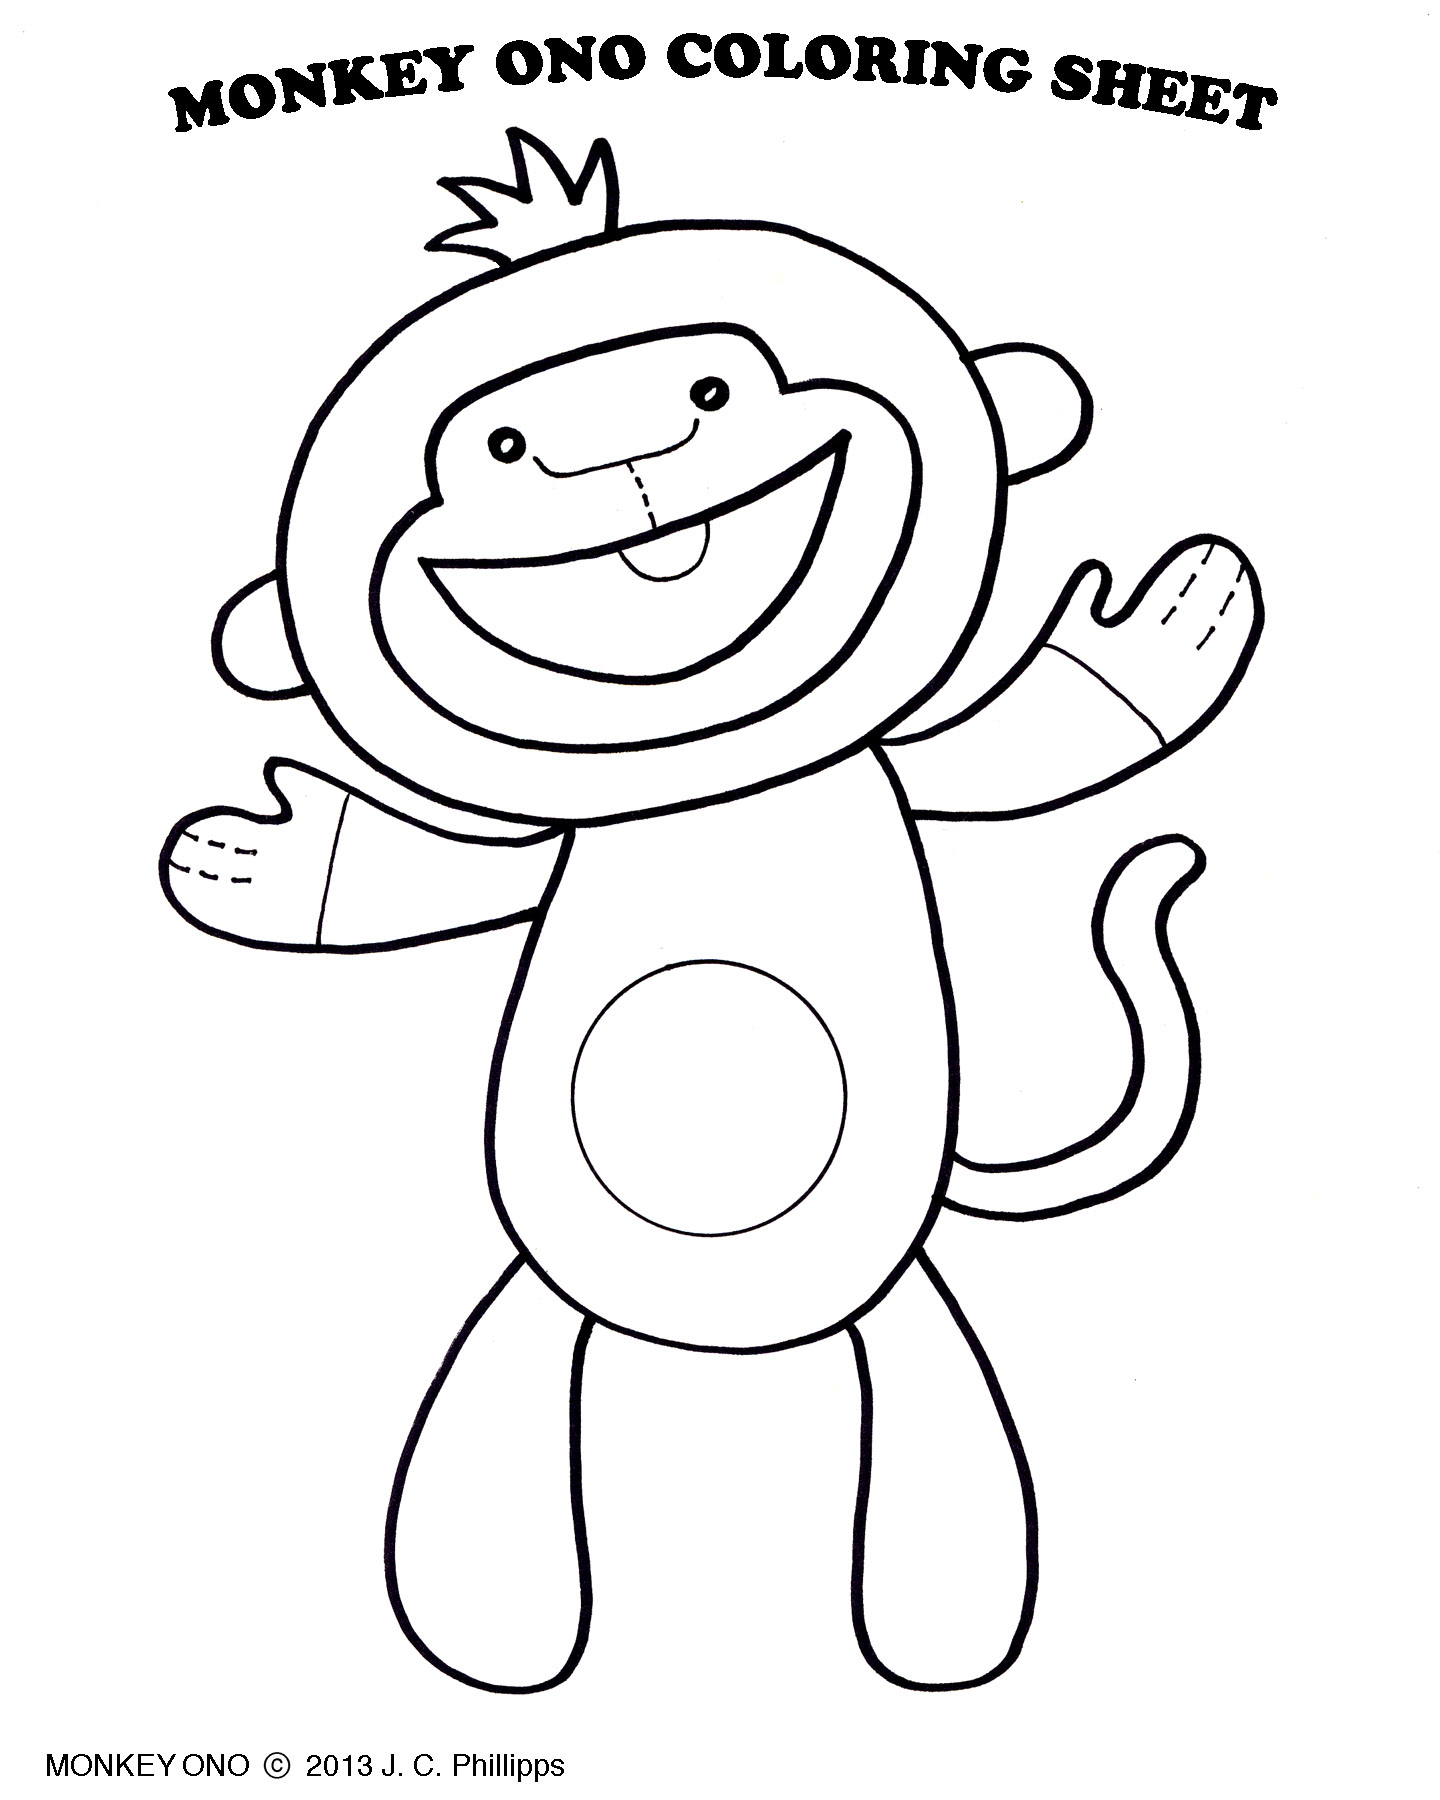  Monkey Coloring Pages | Love coloring pages | #6